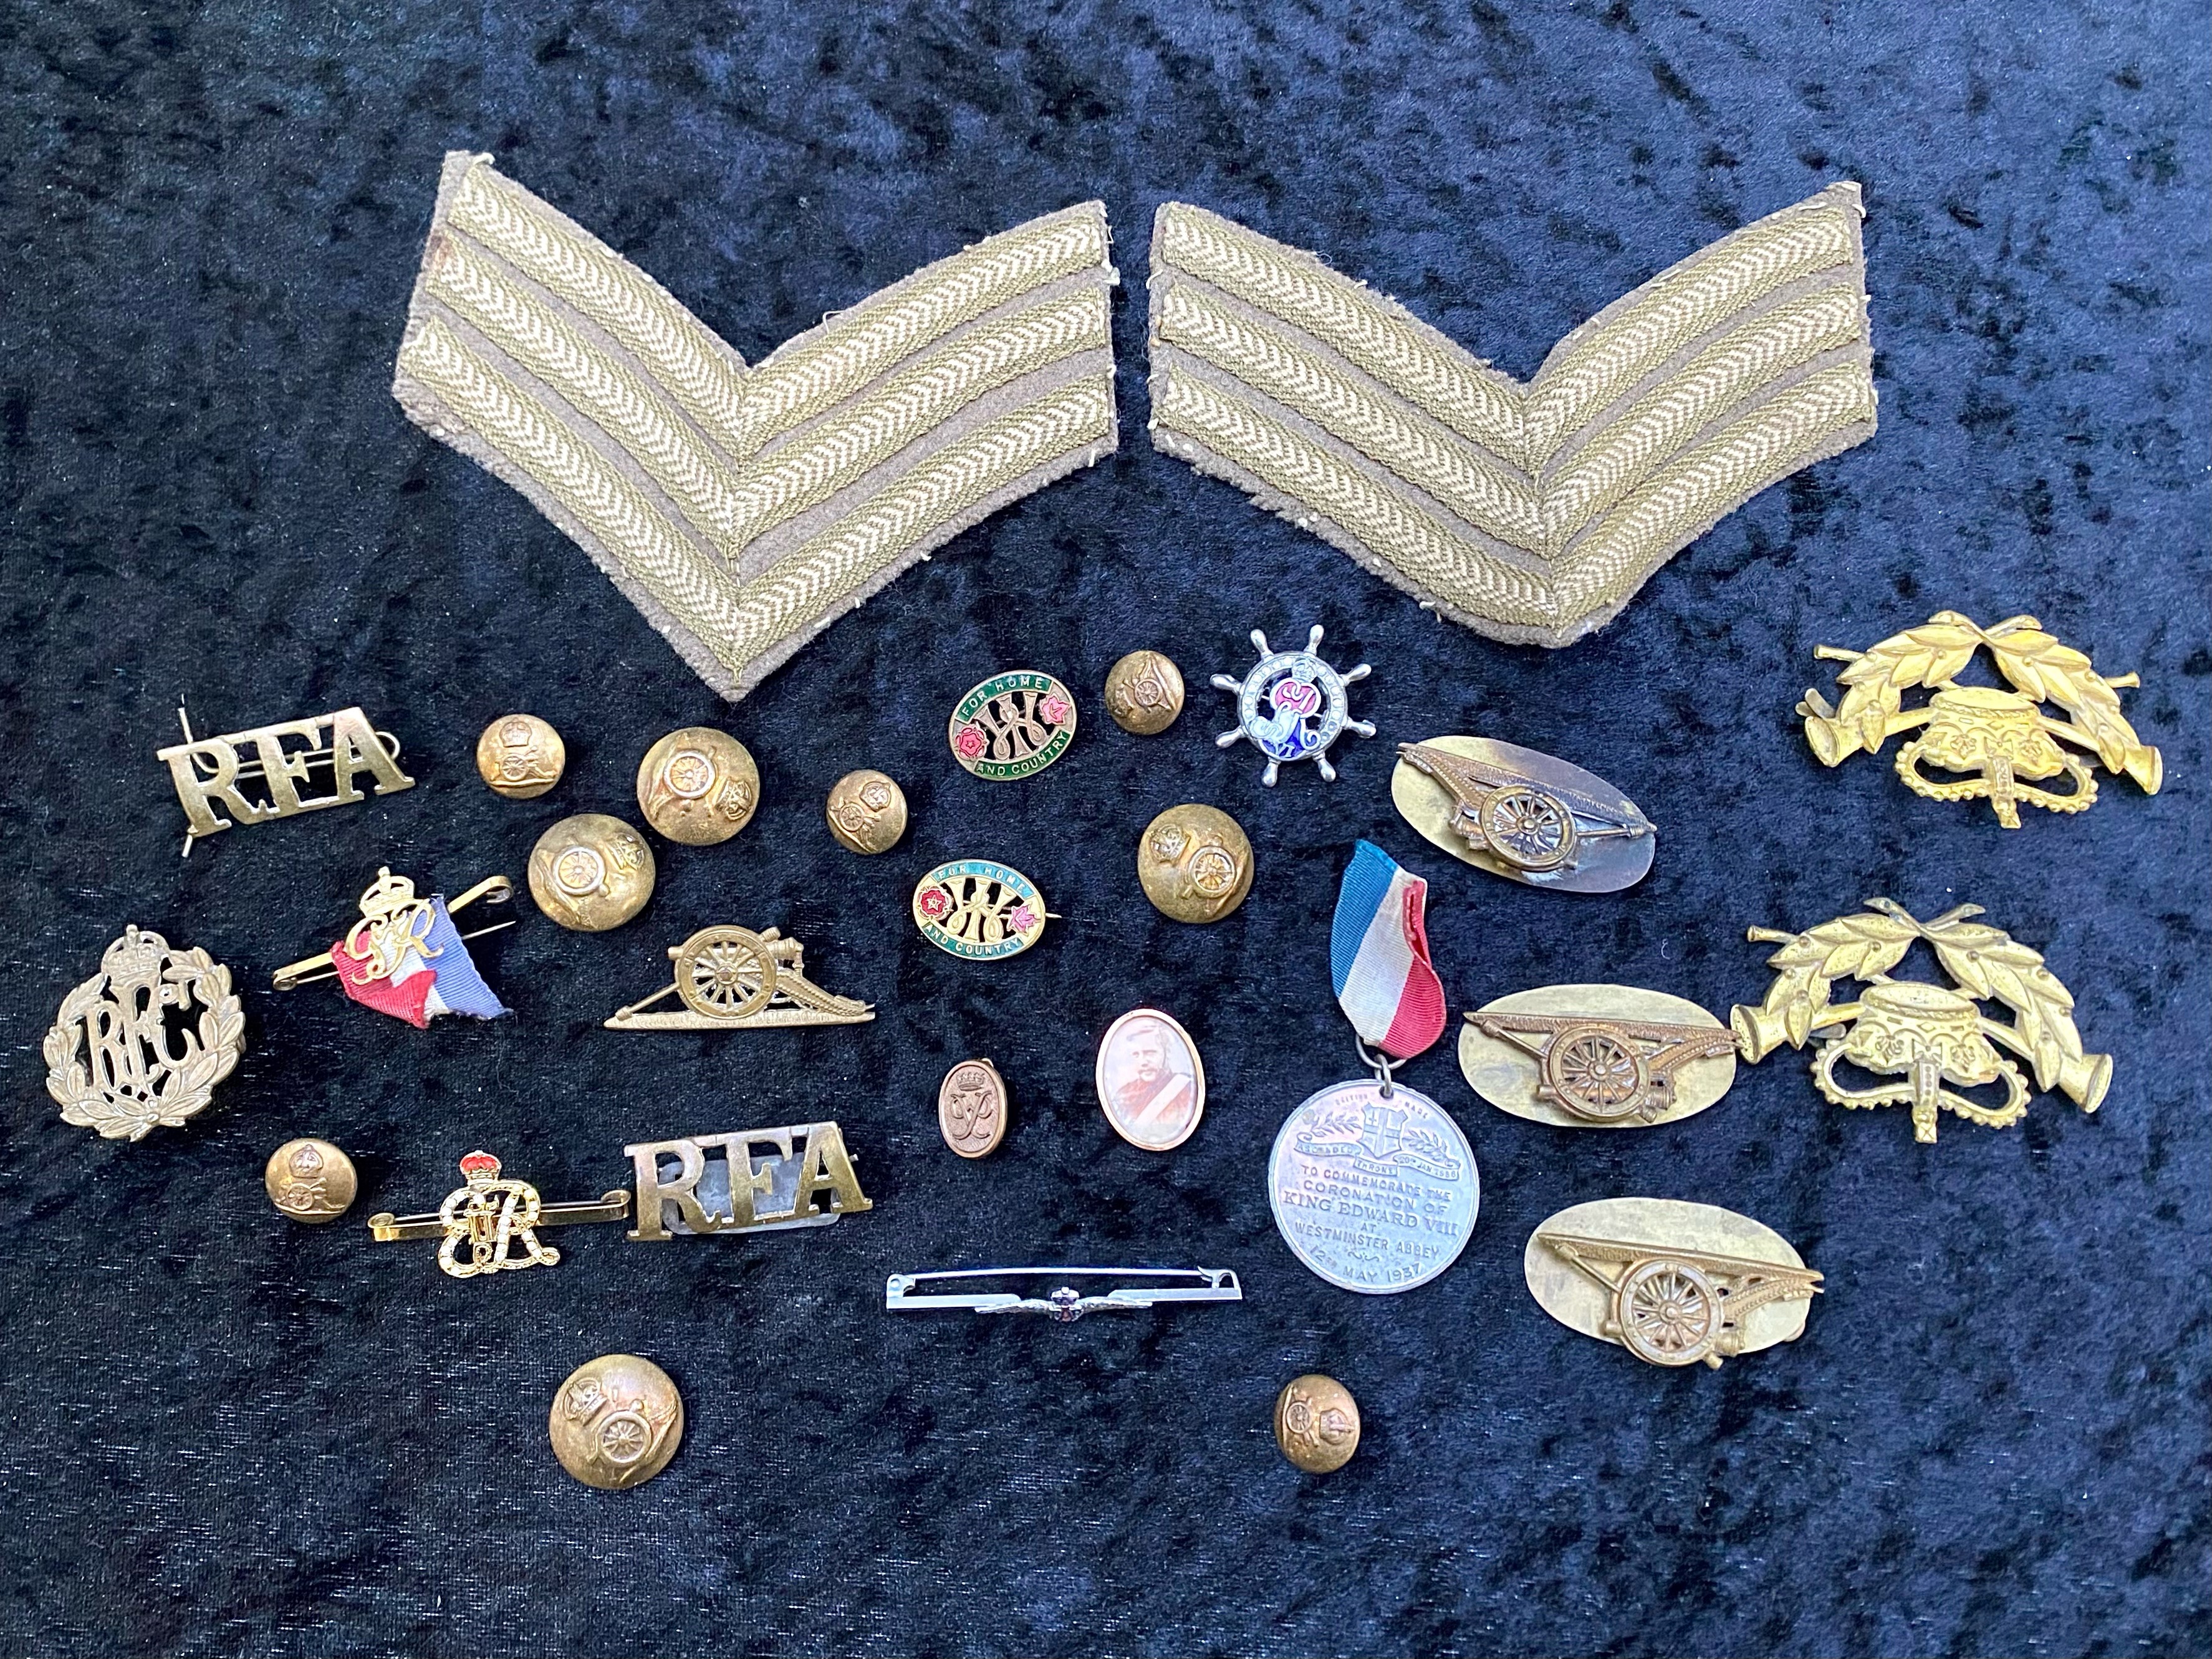 Large Collection of Military Items, to include medals, badges etc; please see accompanying image